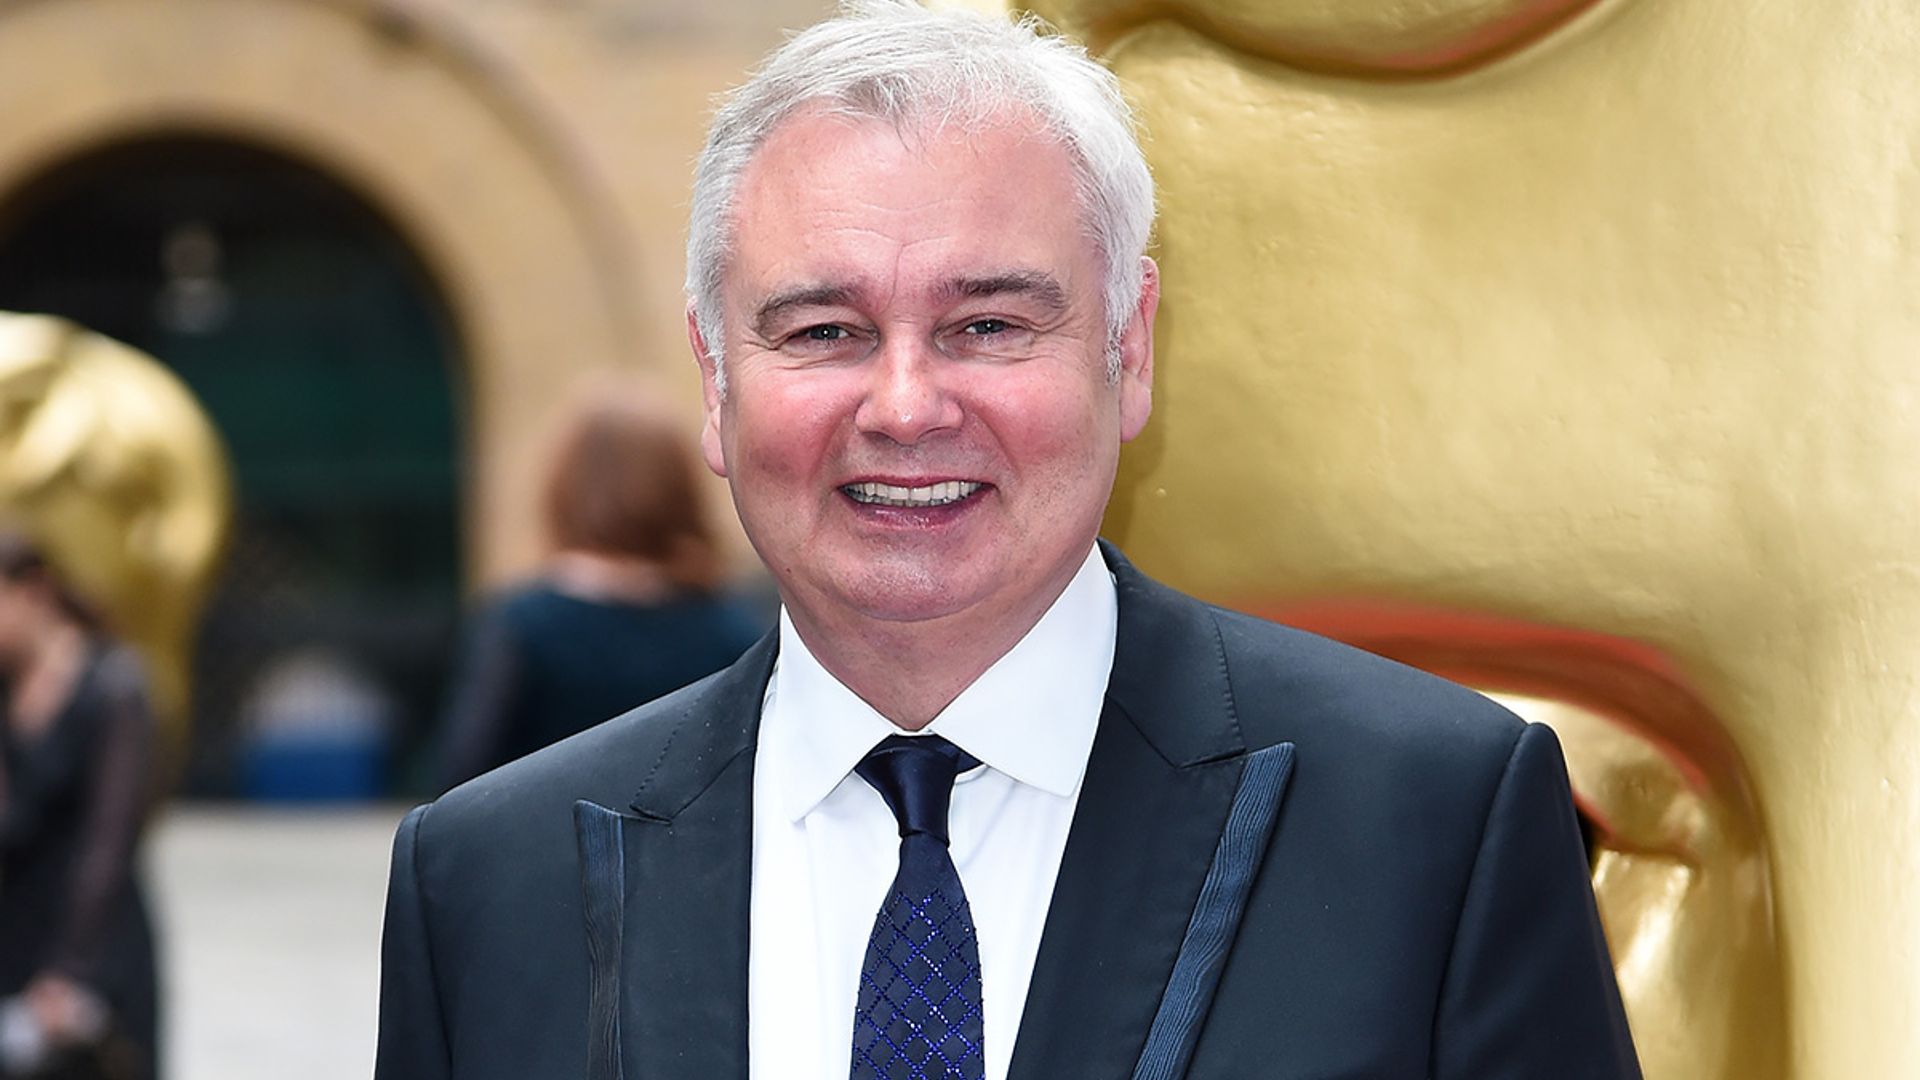 Eamonn Holmes melts hearts with rare photo of his granddaughter